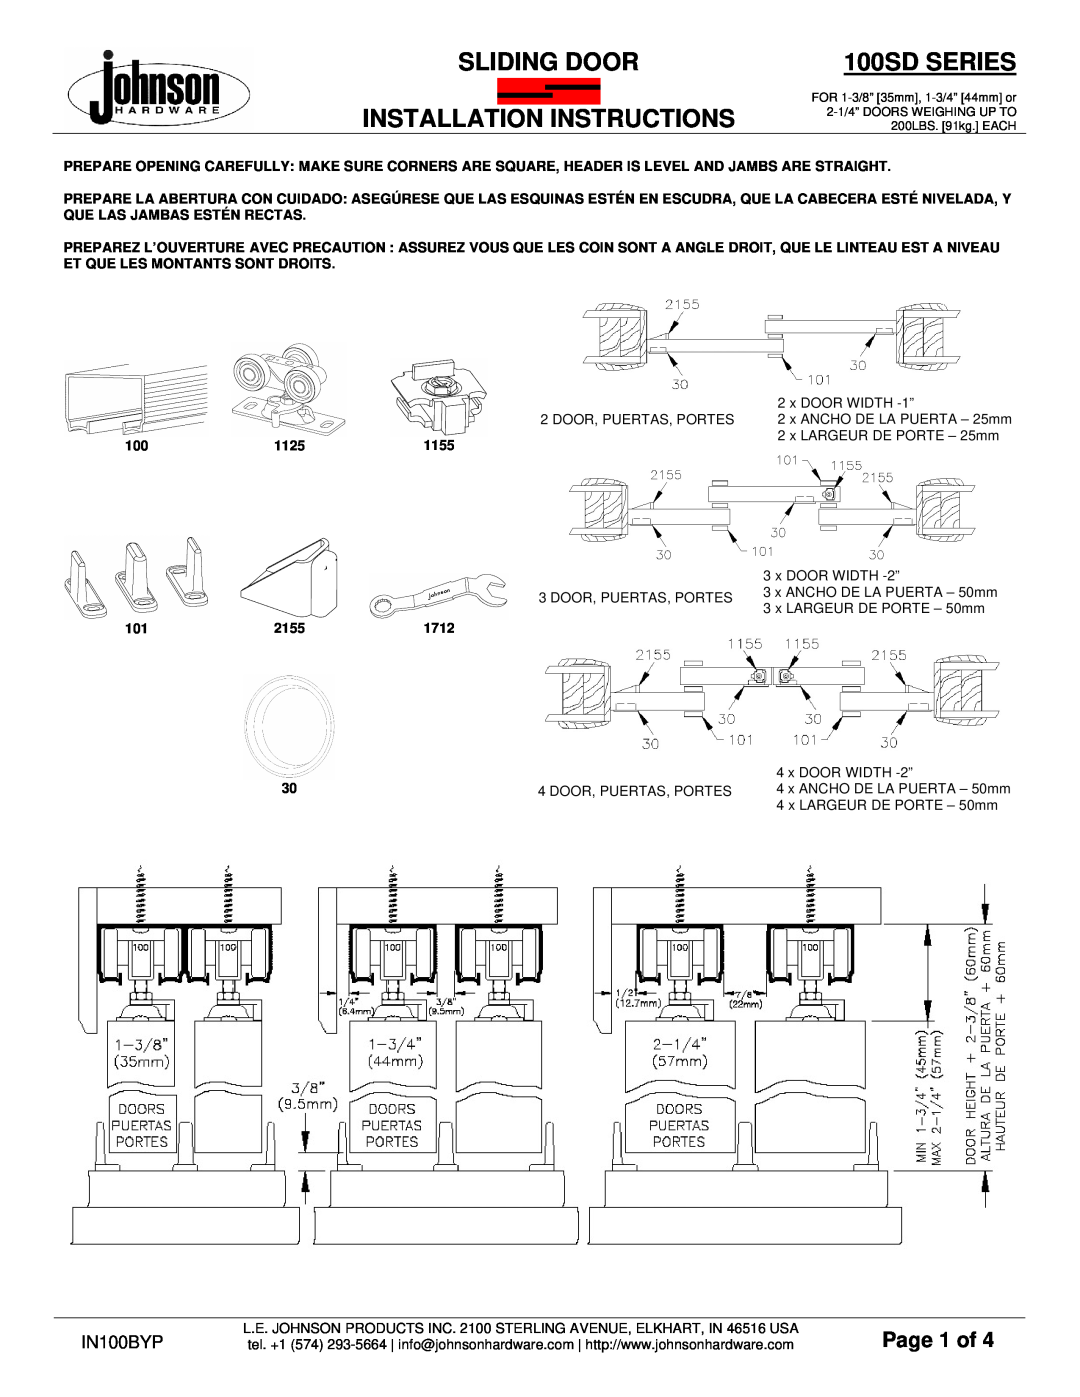 Johnson Hardware 100SD Series installation instructions Sliding Door, 100SD SERIES, Page 1 of, IN100BYP 